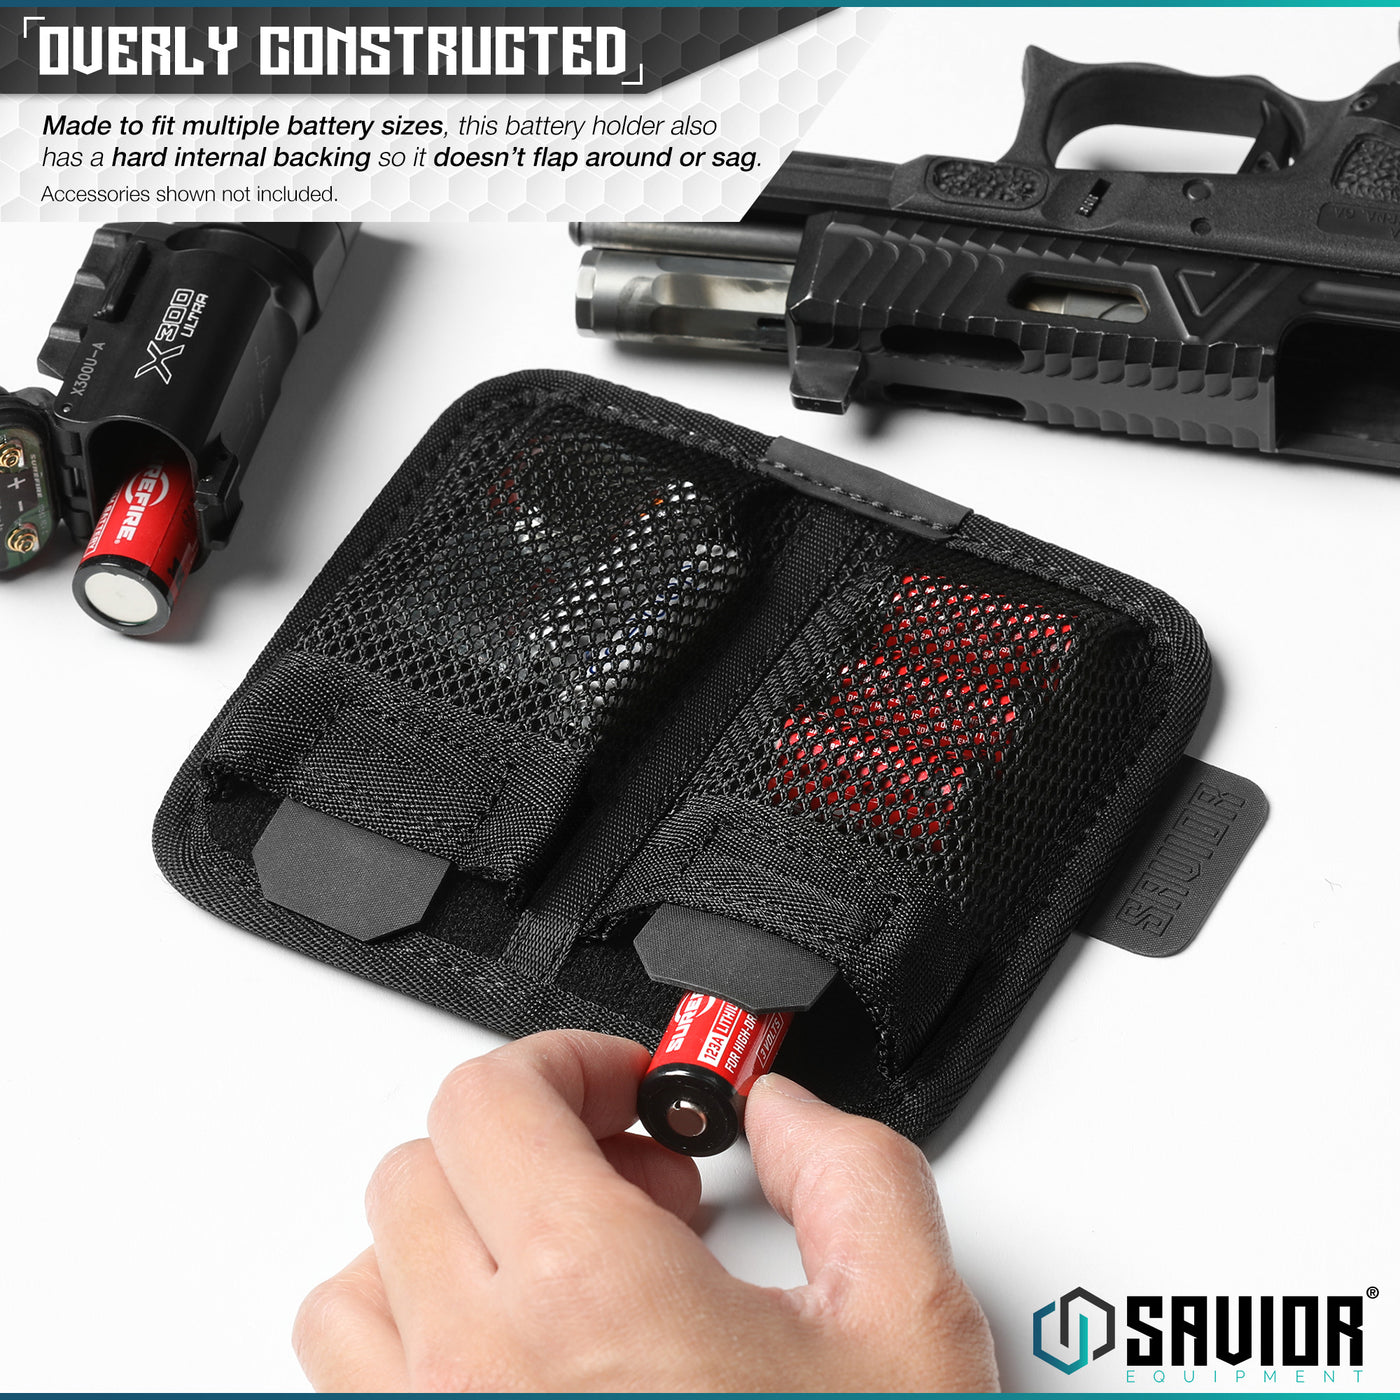 Overly Constructed - Made to fit multiple battery sizes, this battery holder also has a hard internal backing so it doesn’t flap around or sag. Accessories shown not included.